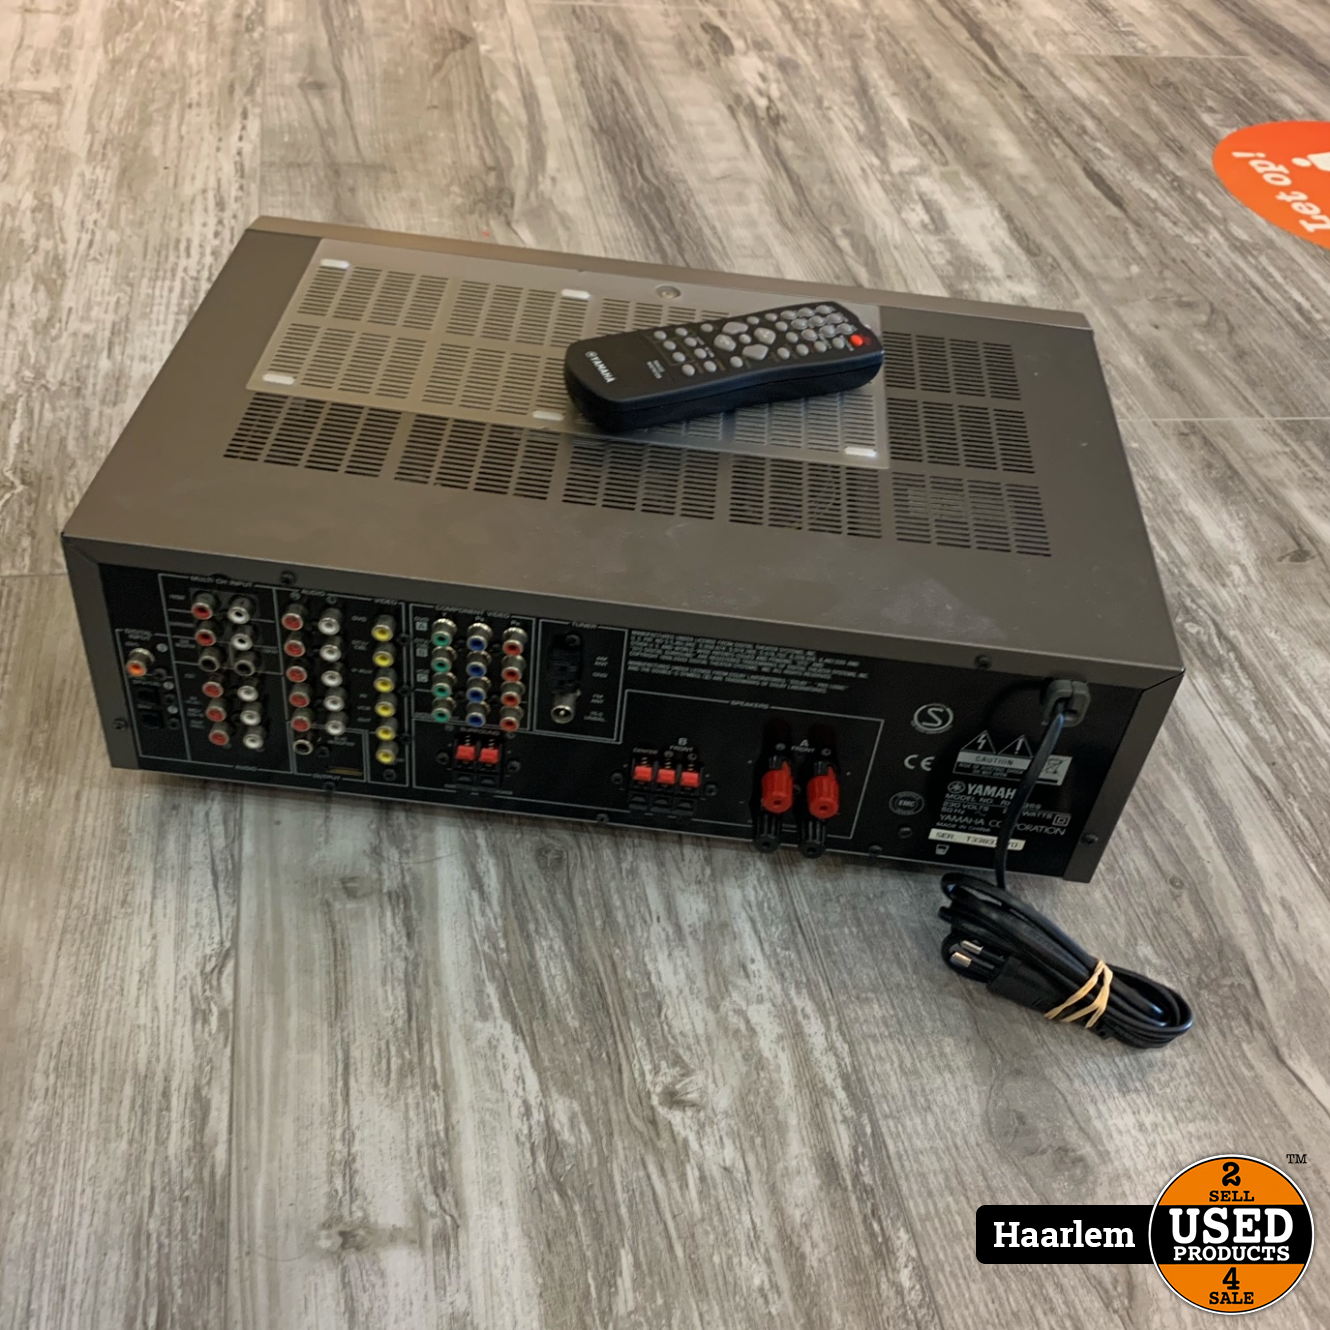 rouw Drink water wang Yamaha RX-V359 100 Watt 5.1 Surround receiver/versterker - Used Products  Haarlem